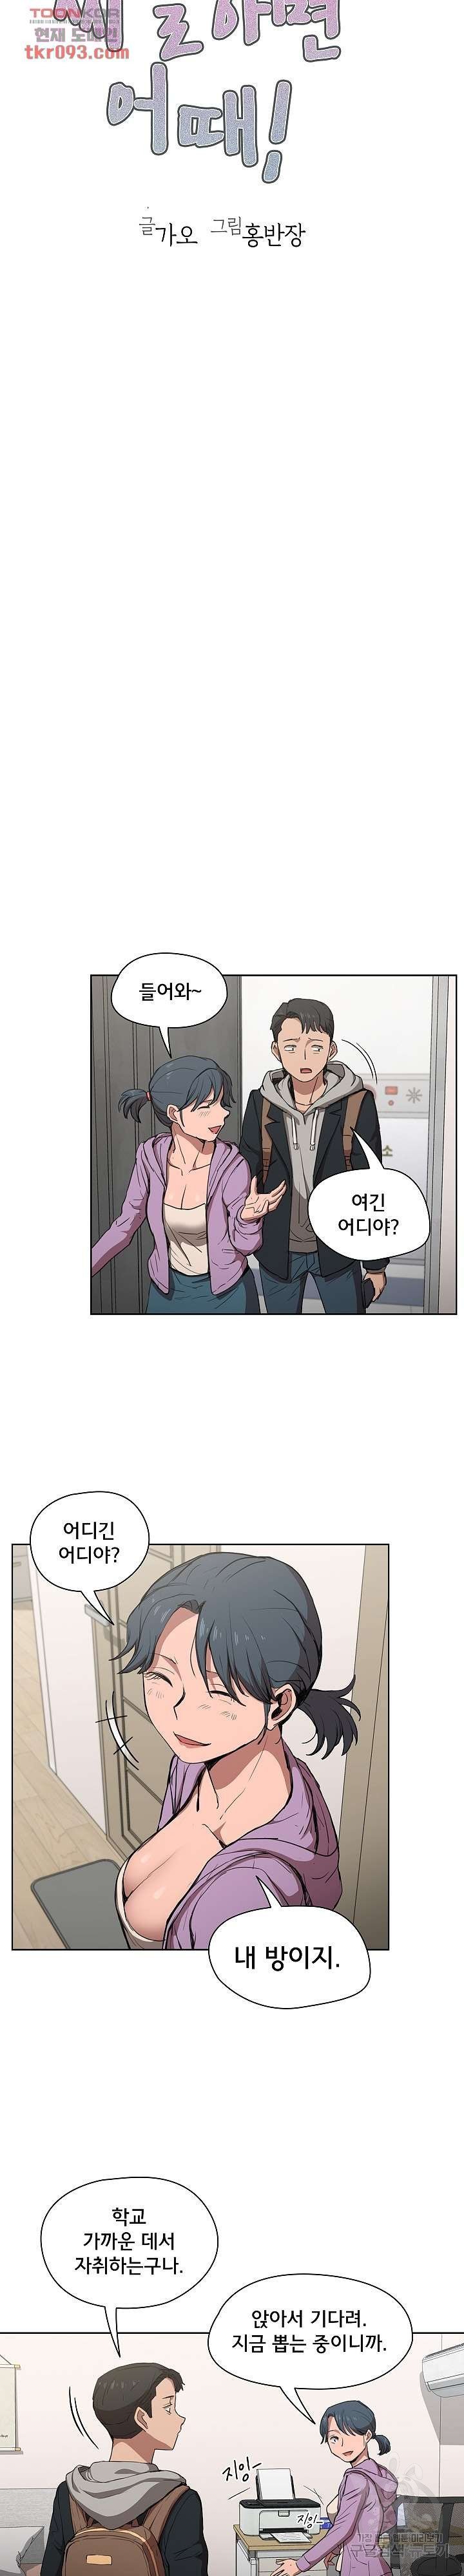 how-about-getting-lost-raw-chap-38-1